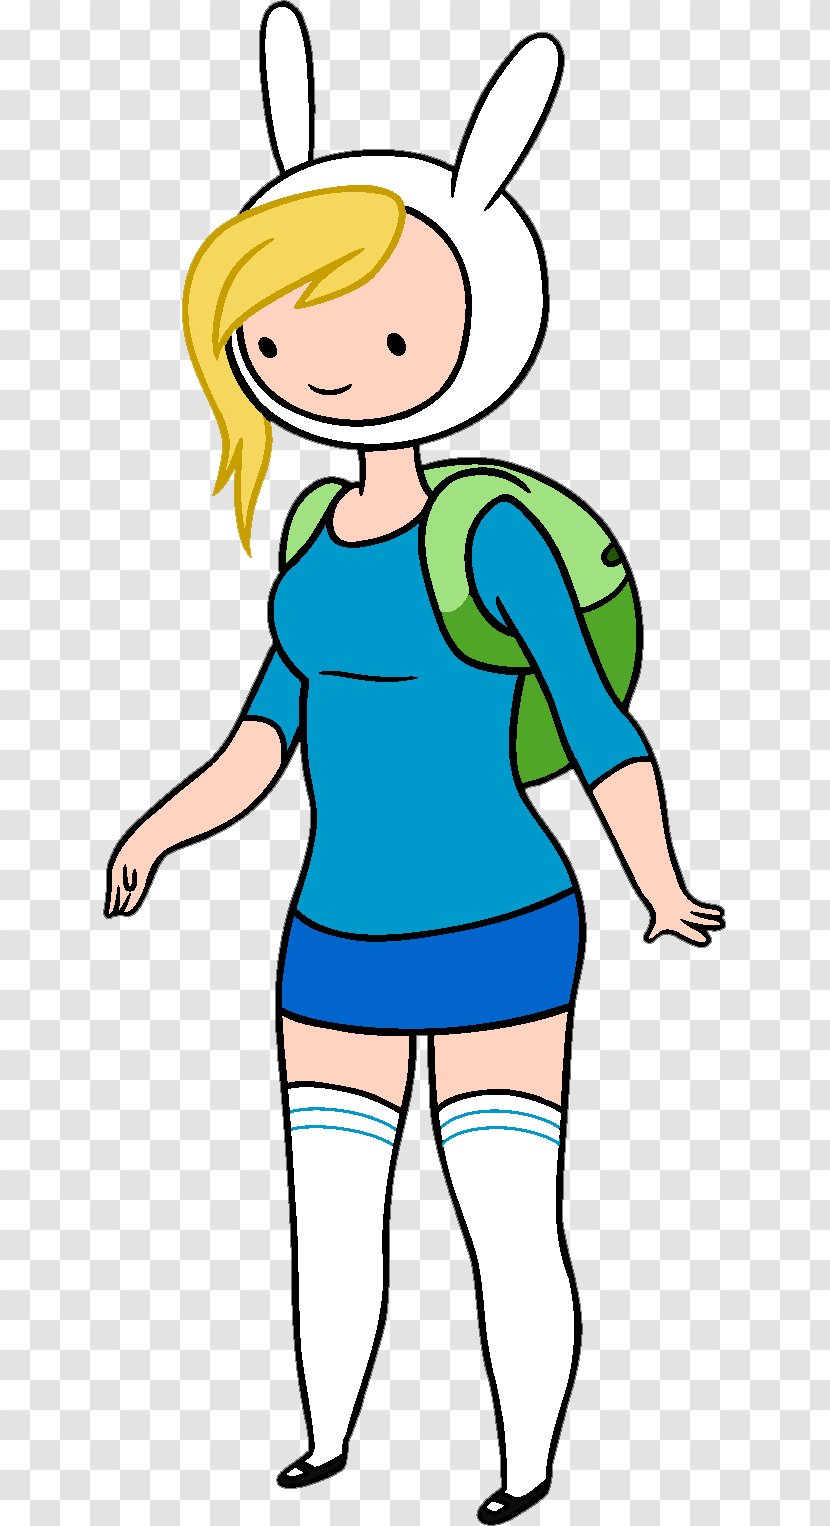 Marceline The Vampire Queen Jake Dog Finn Human Ice King Fionna And Cake - Cartoon - Adventure Time Transparent PNG